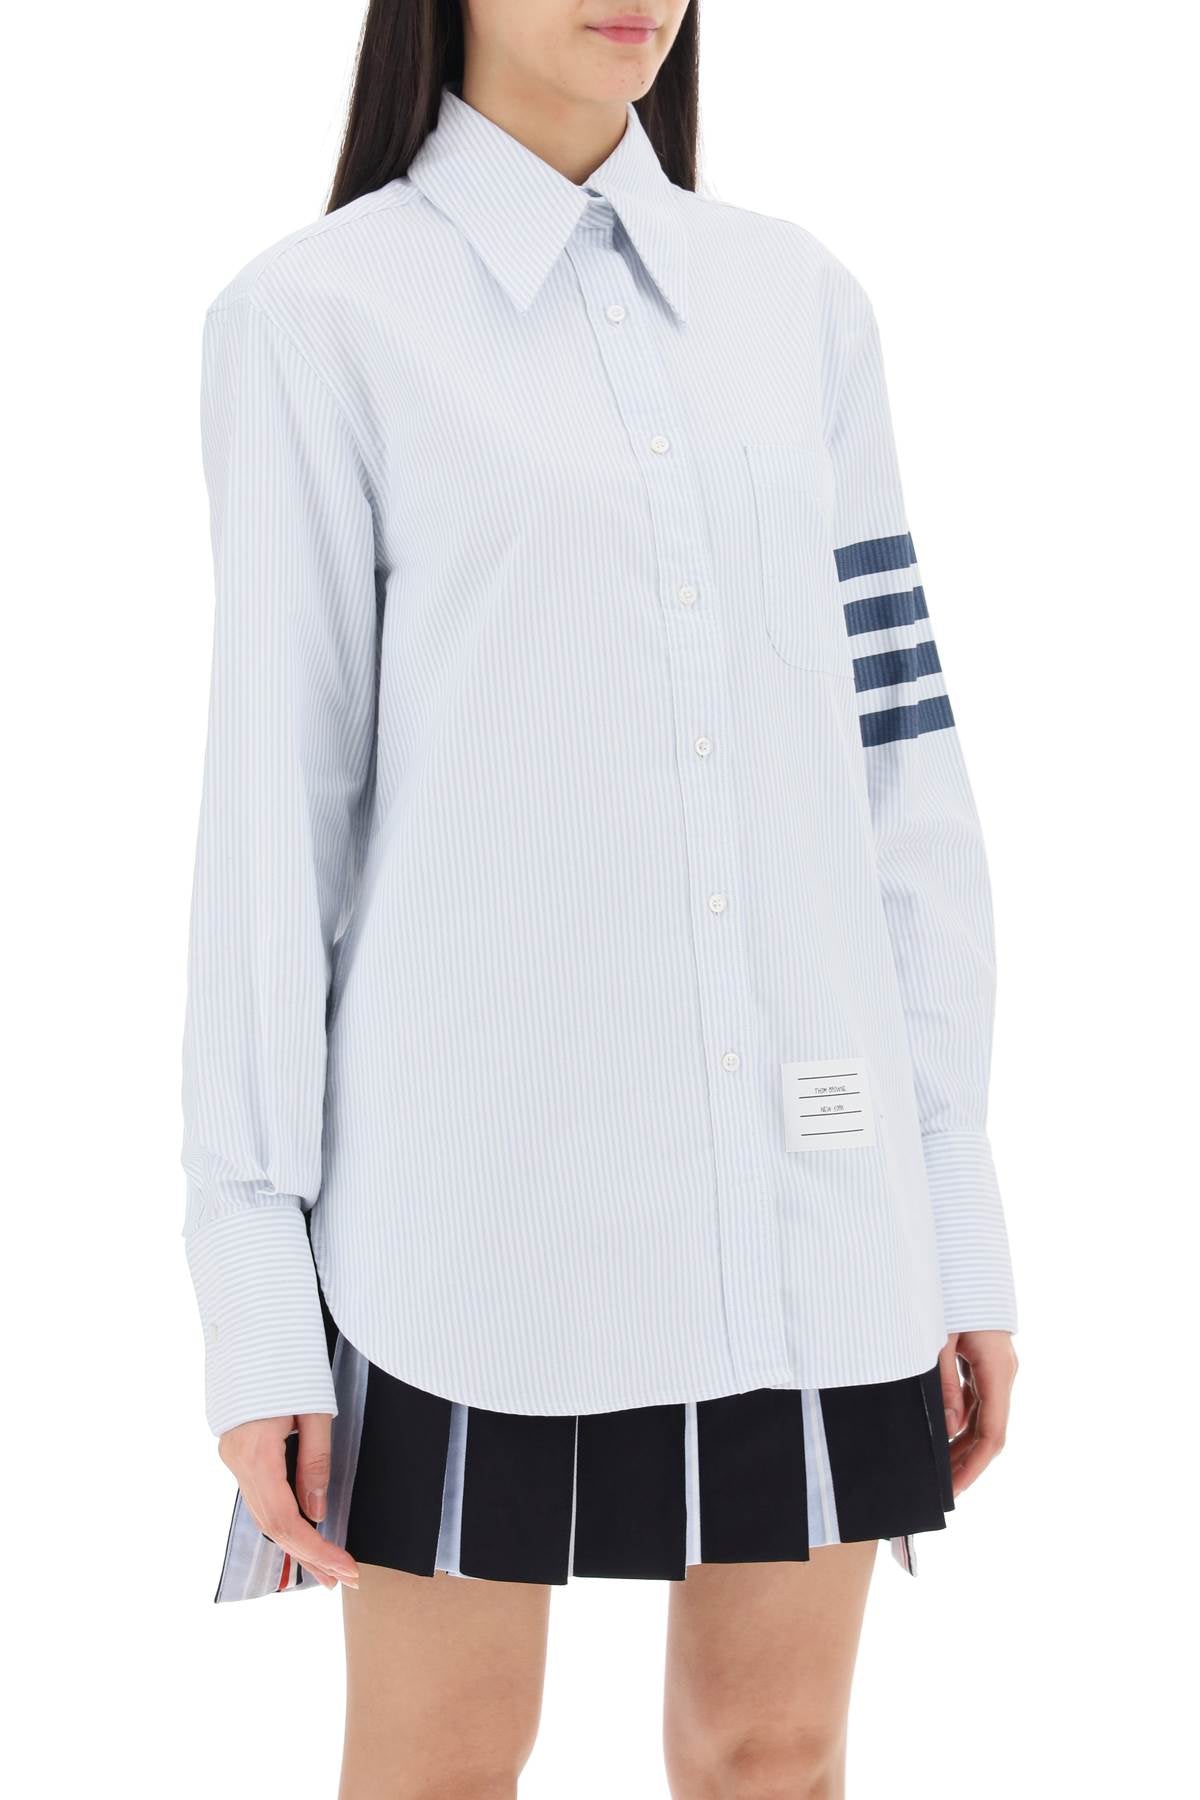 Thom browne striped oxford shirt with pointed collar-1